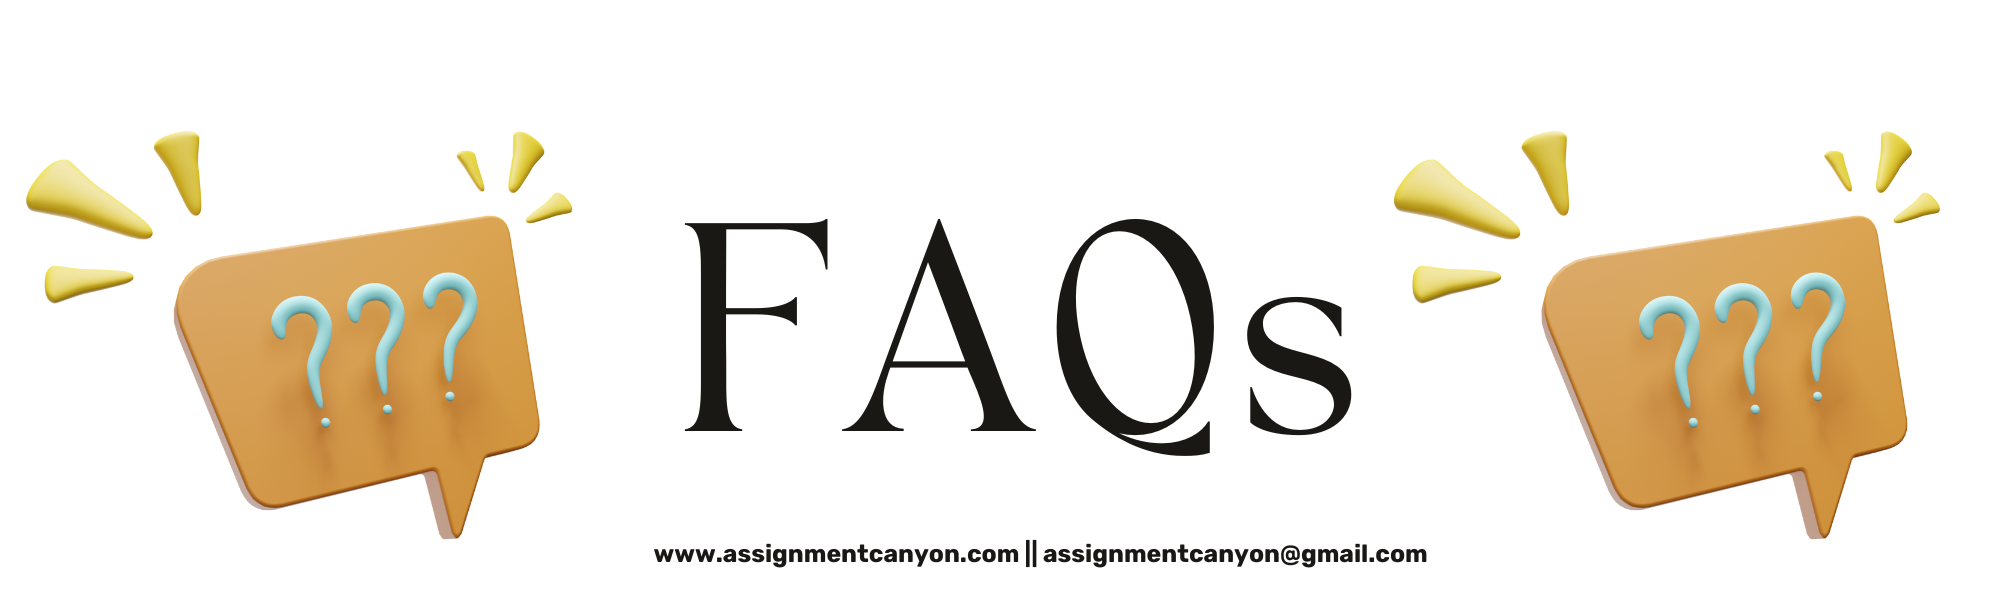 FAQs - Get your questions answered on how to get assignments answers for college students